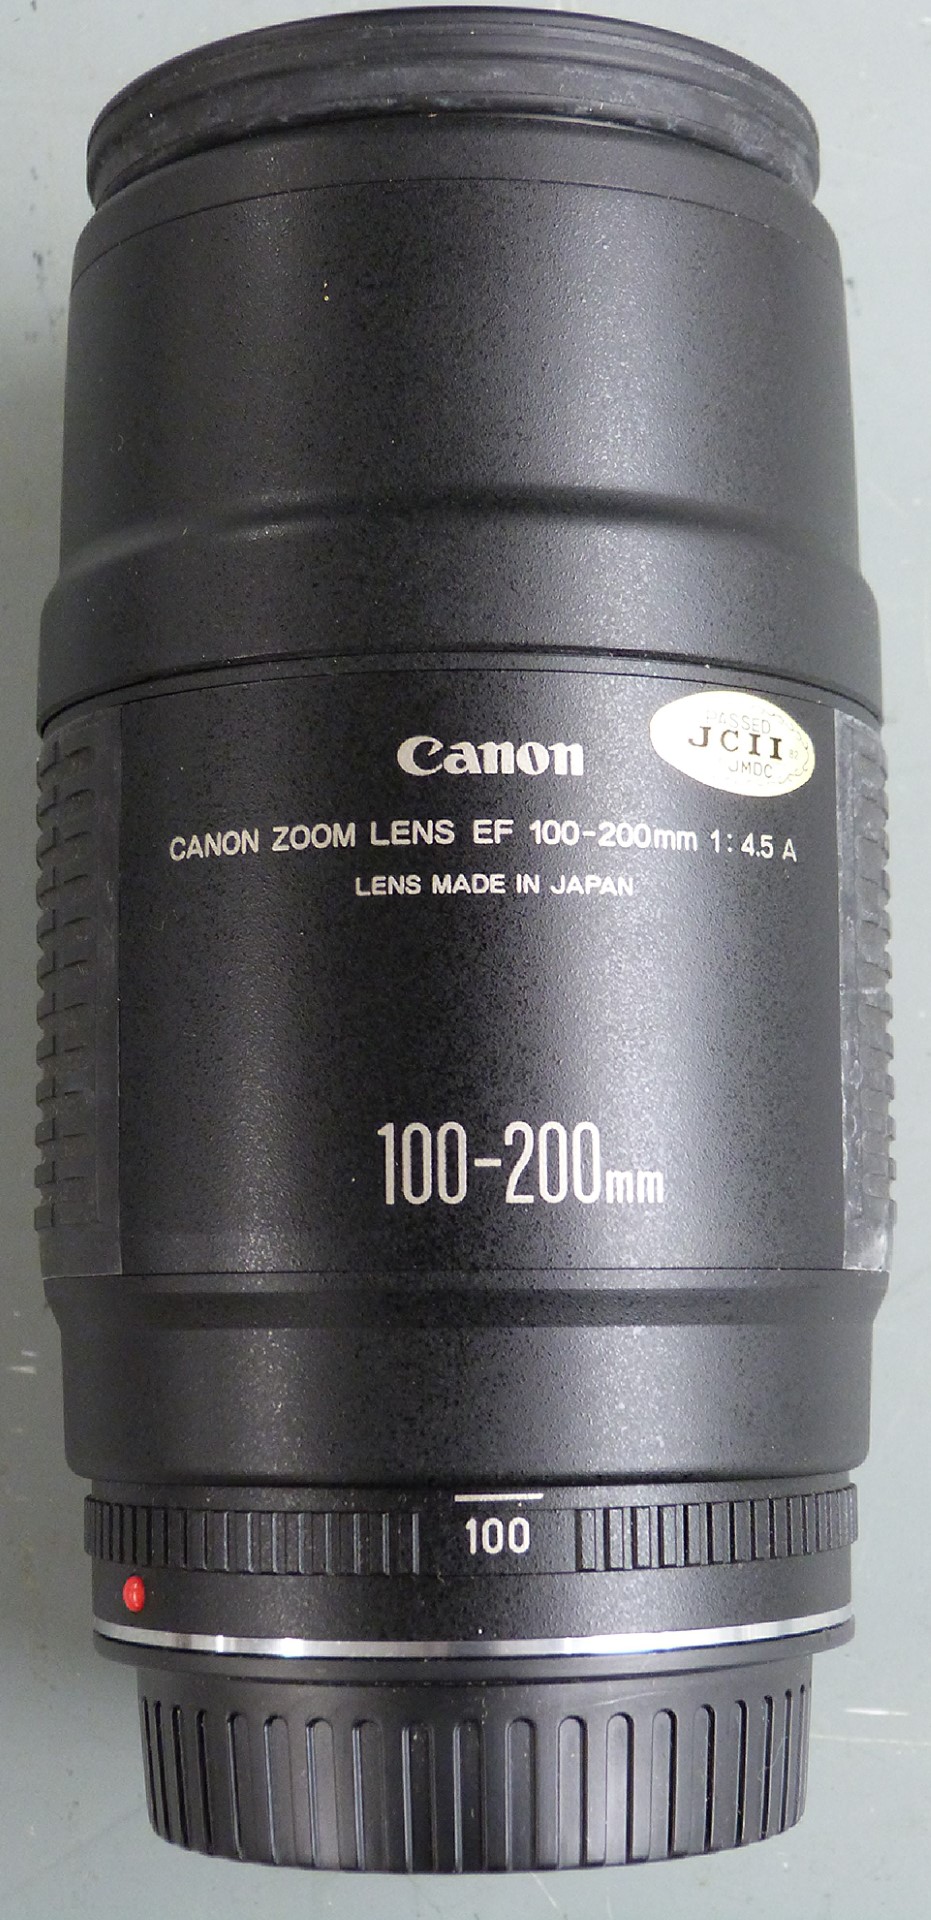 Canon EOS 750 SLR camera with Canon zoom lens EF 35-70mm 1:3.5-4.5A, Canon zoom lens EF 100-200mm - Image 4 of 4